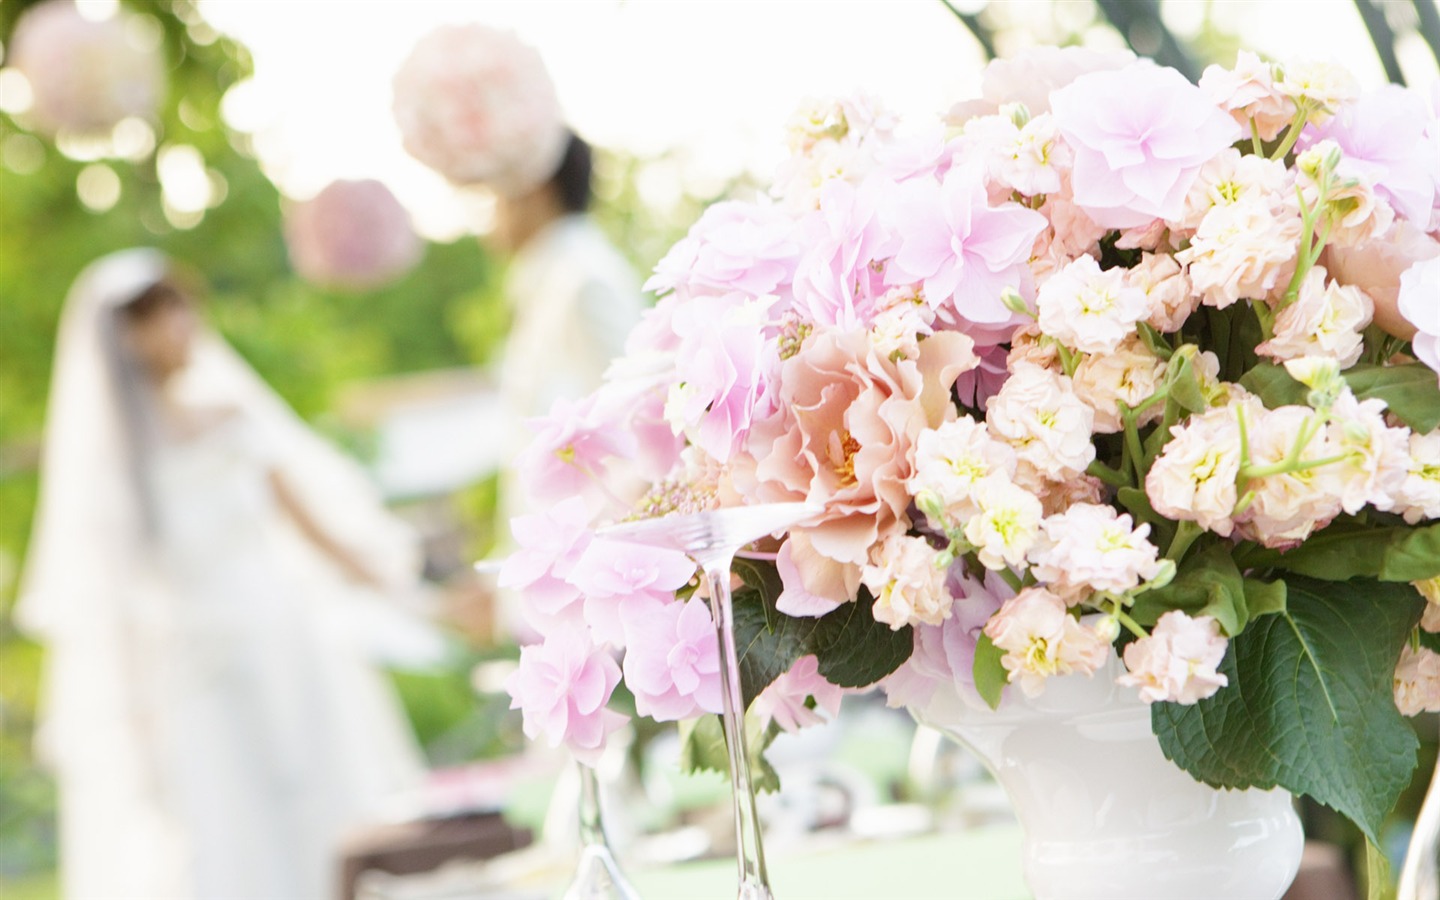 Weddings and Flowers wallpaper (2) #1 - 1440x900